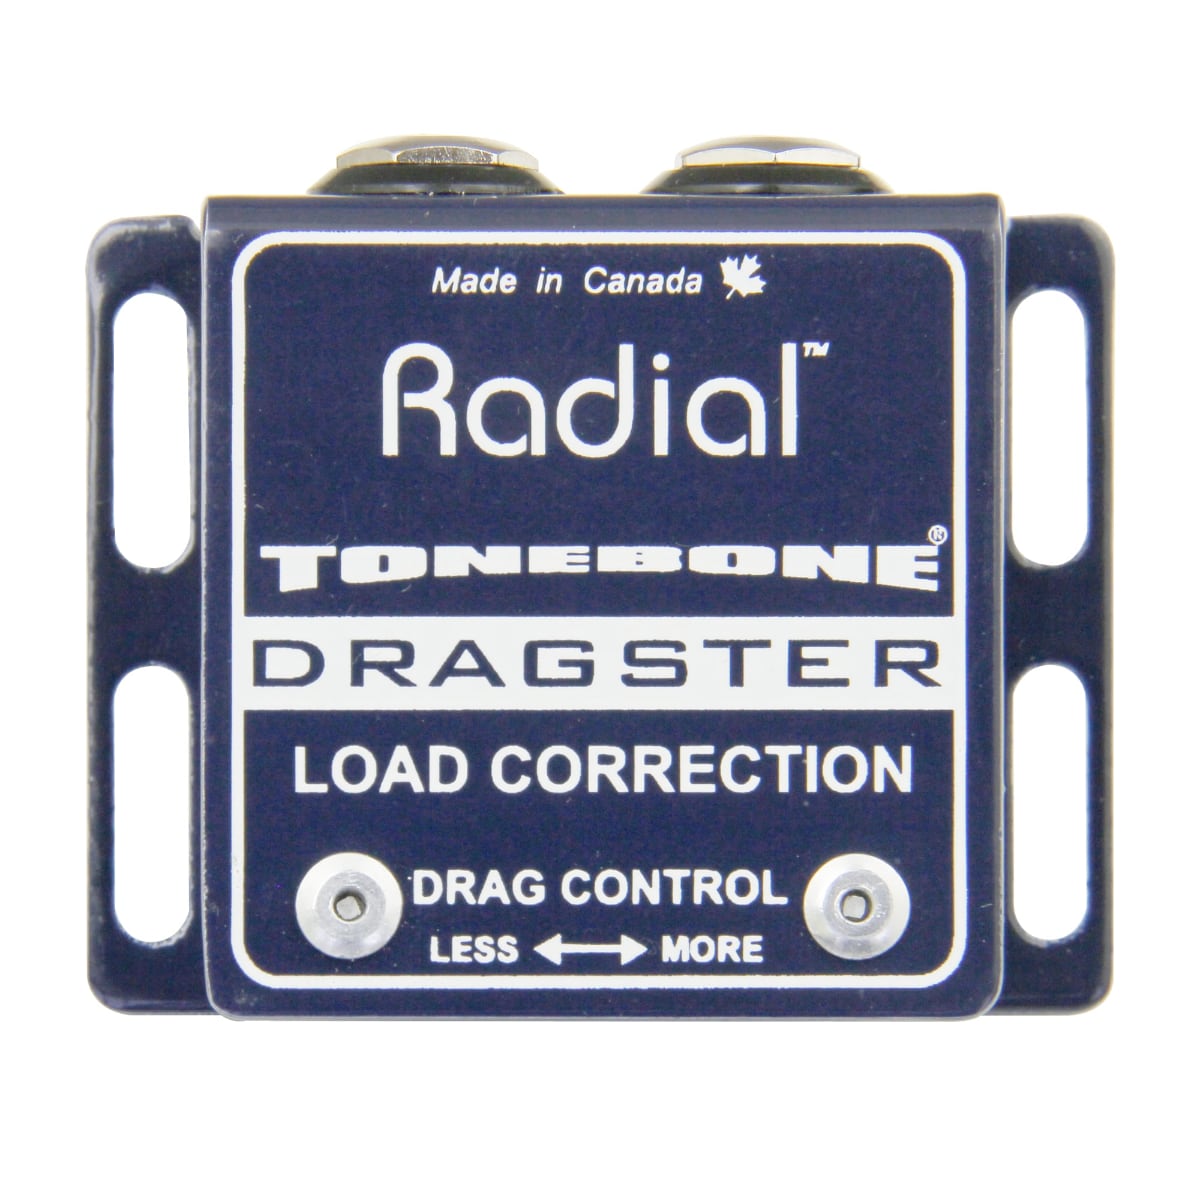 Radial Engineering Dragster Load correction device for magnetic pickups, compact & light weight